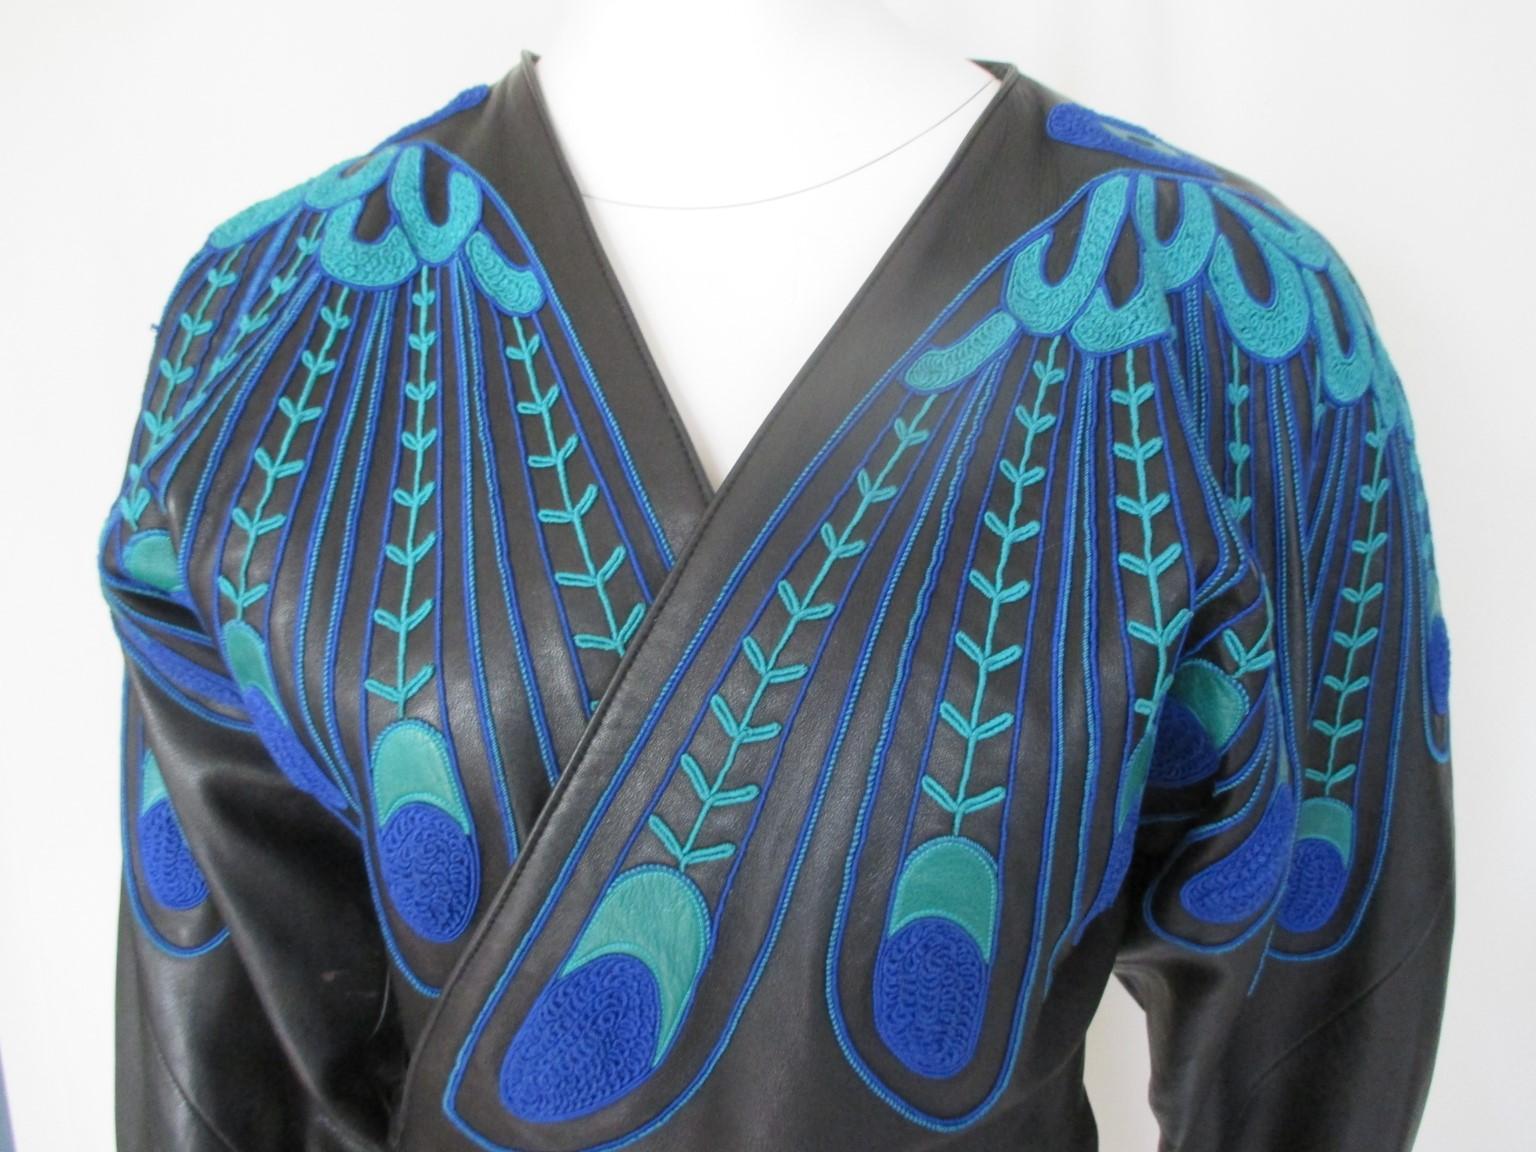 Rare 'peacock feather' embroidered leather jacket by Jean Claude Jitrois

We offer more leather Gucci, Hermes and exclusive Fur items, view our frontstore.

Details:
 Numbered and dating from the 1980s.
The softest leather.
 Fits a S / M.